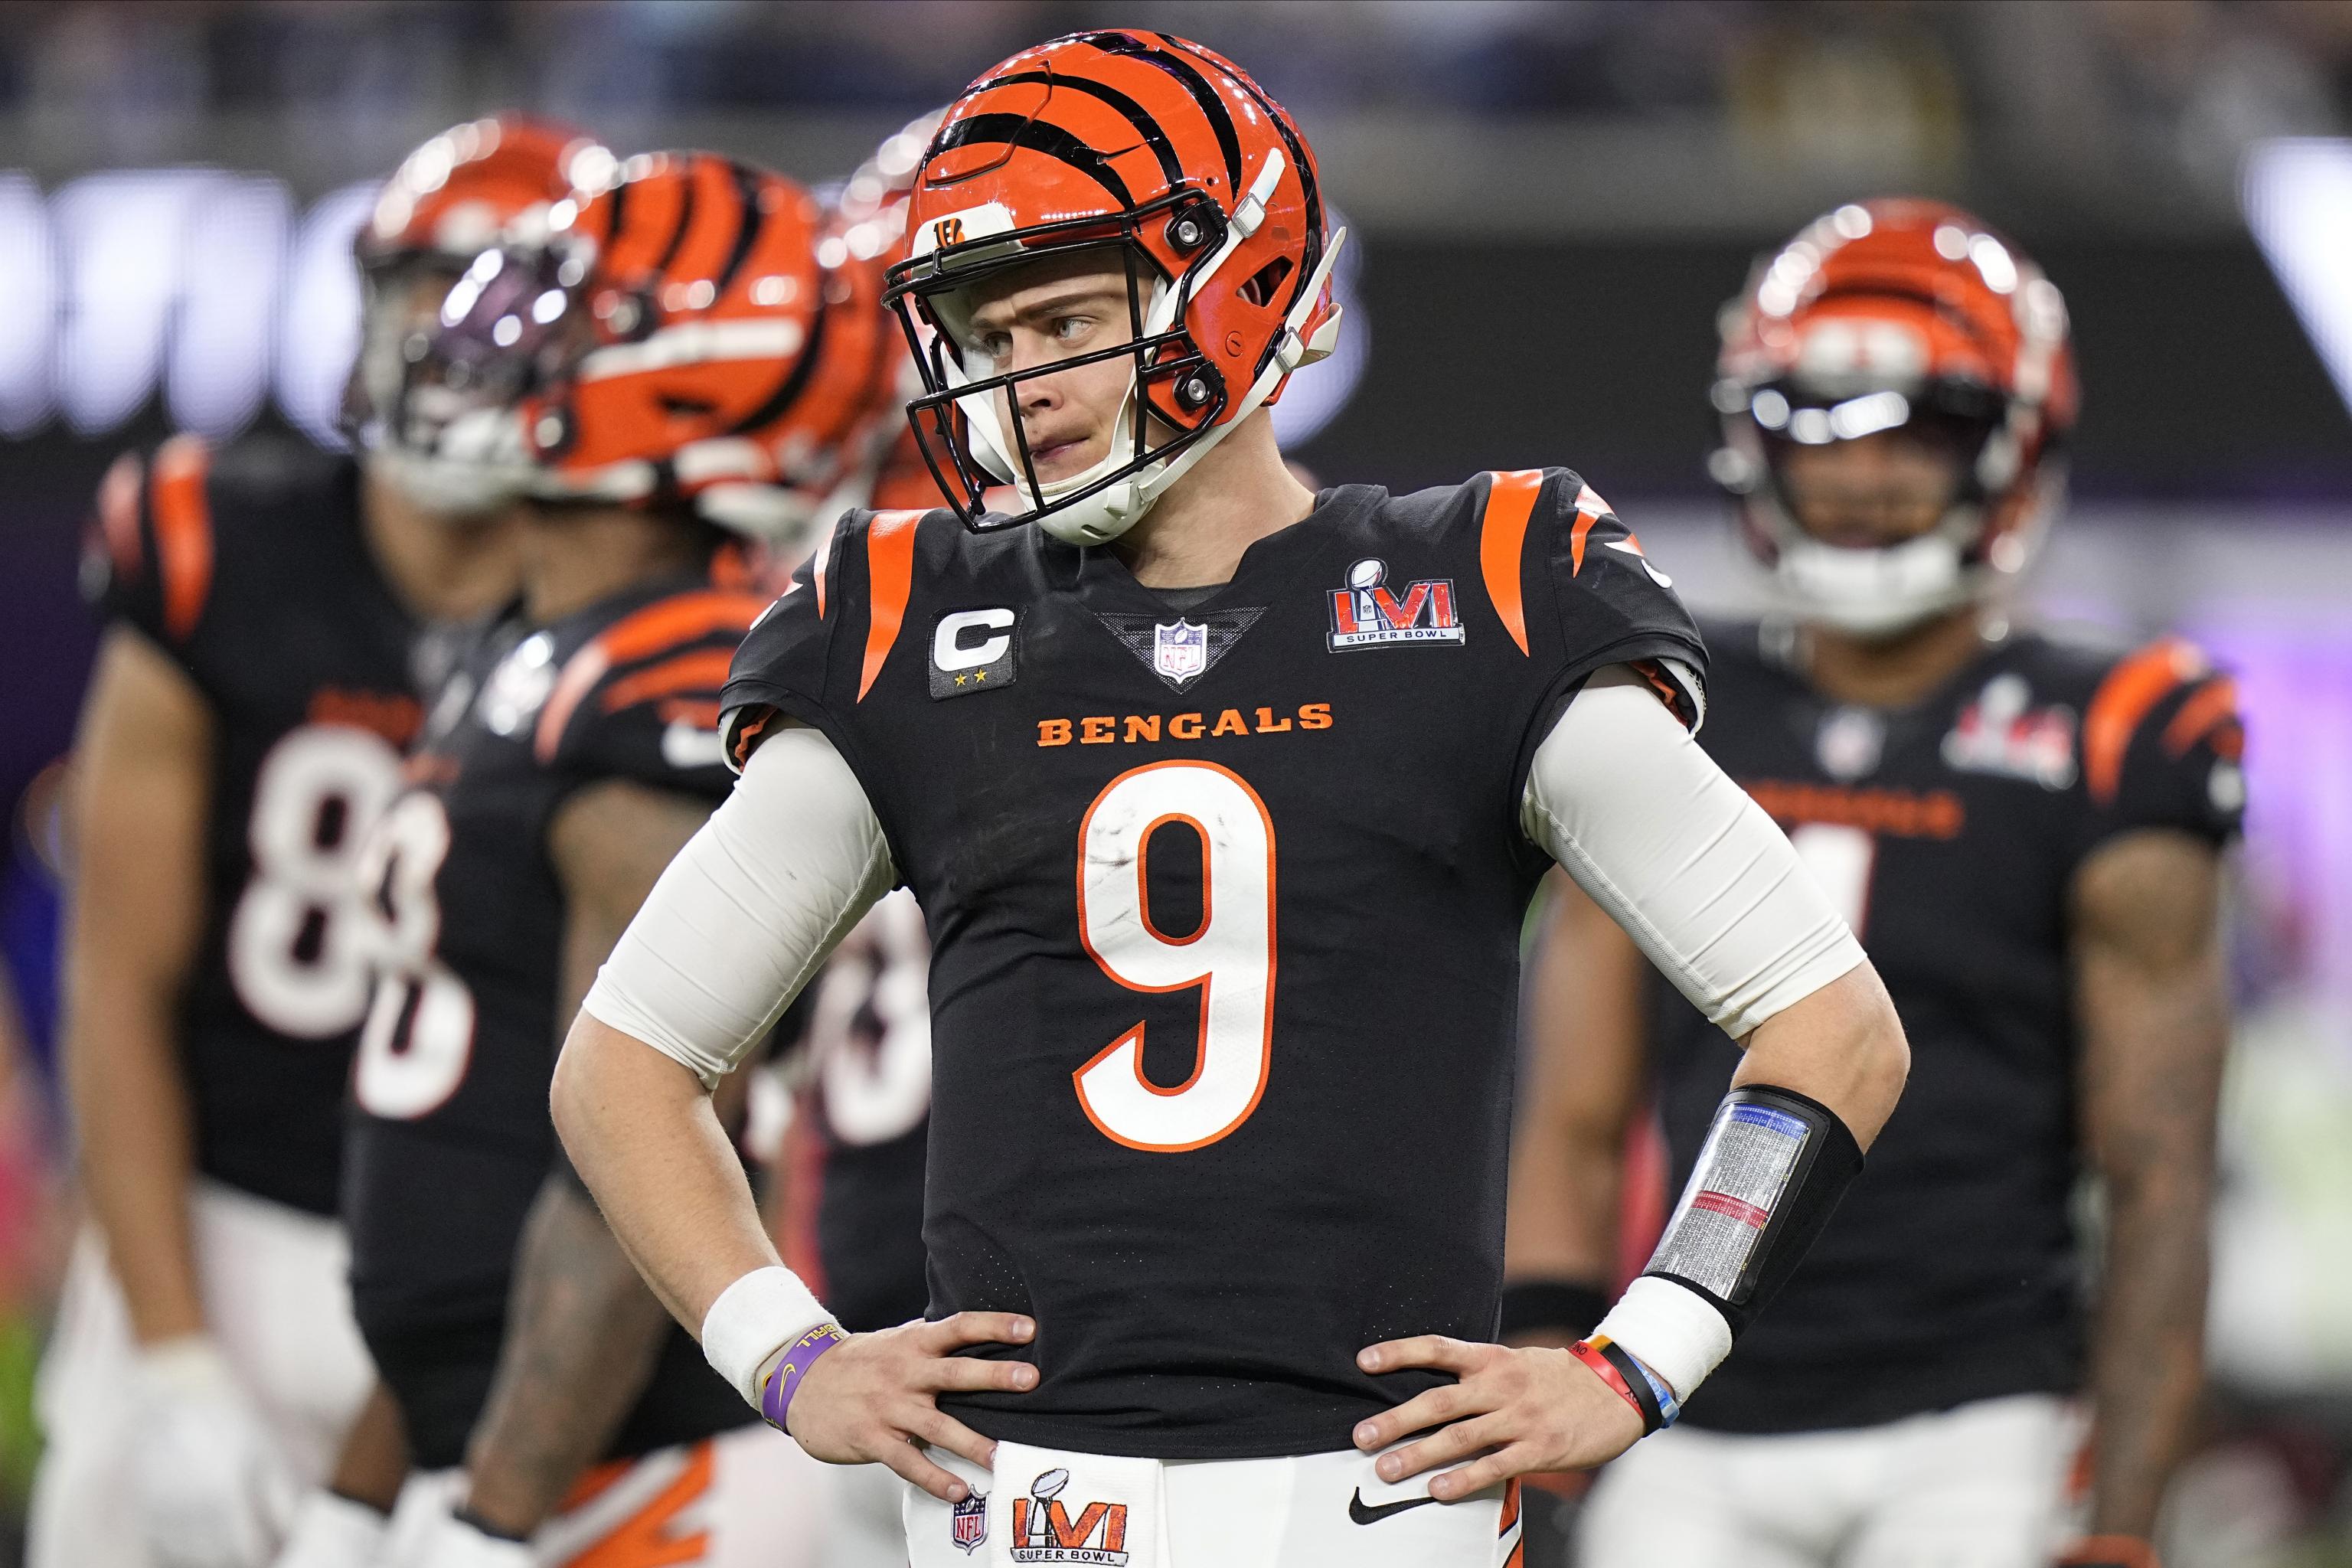 Bengals: Joe Burrow won't participate in first 2023 Pro Bowl